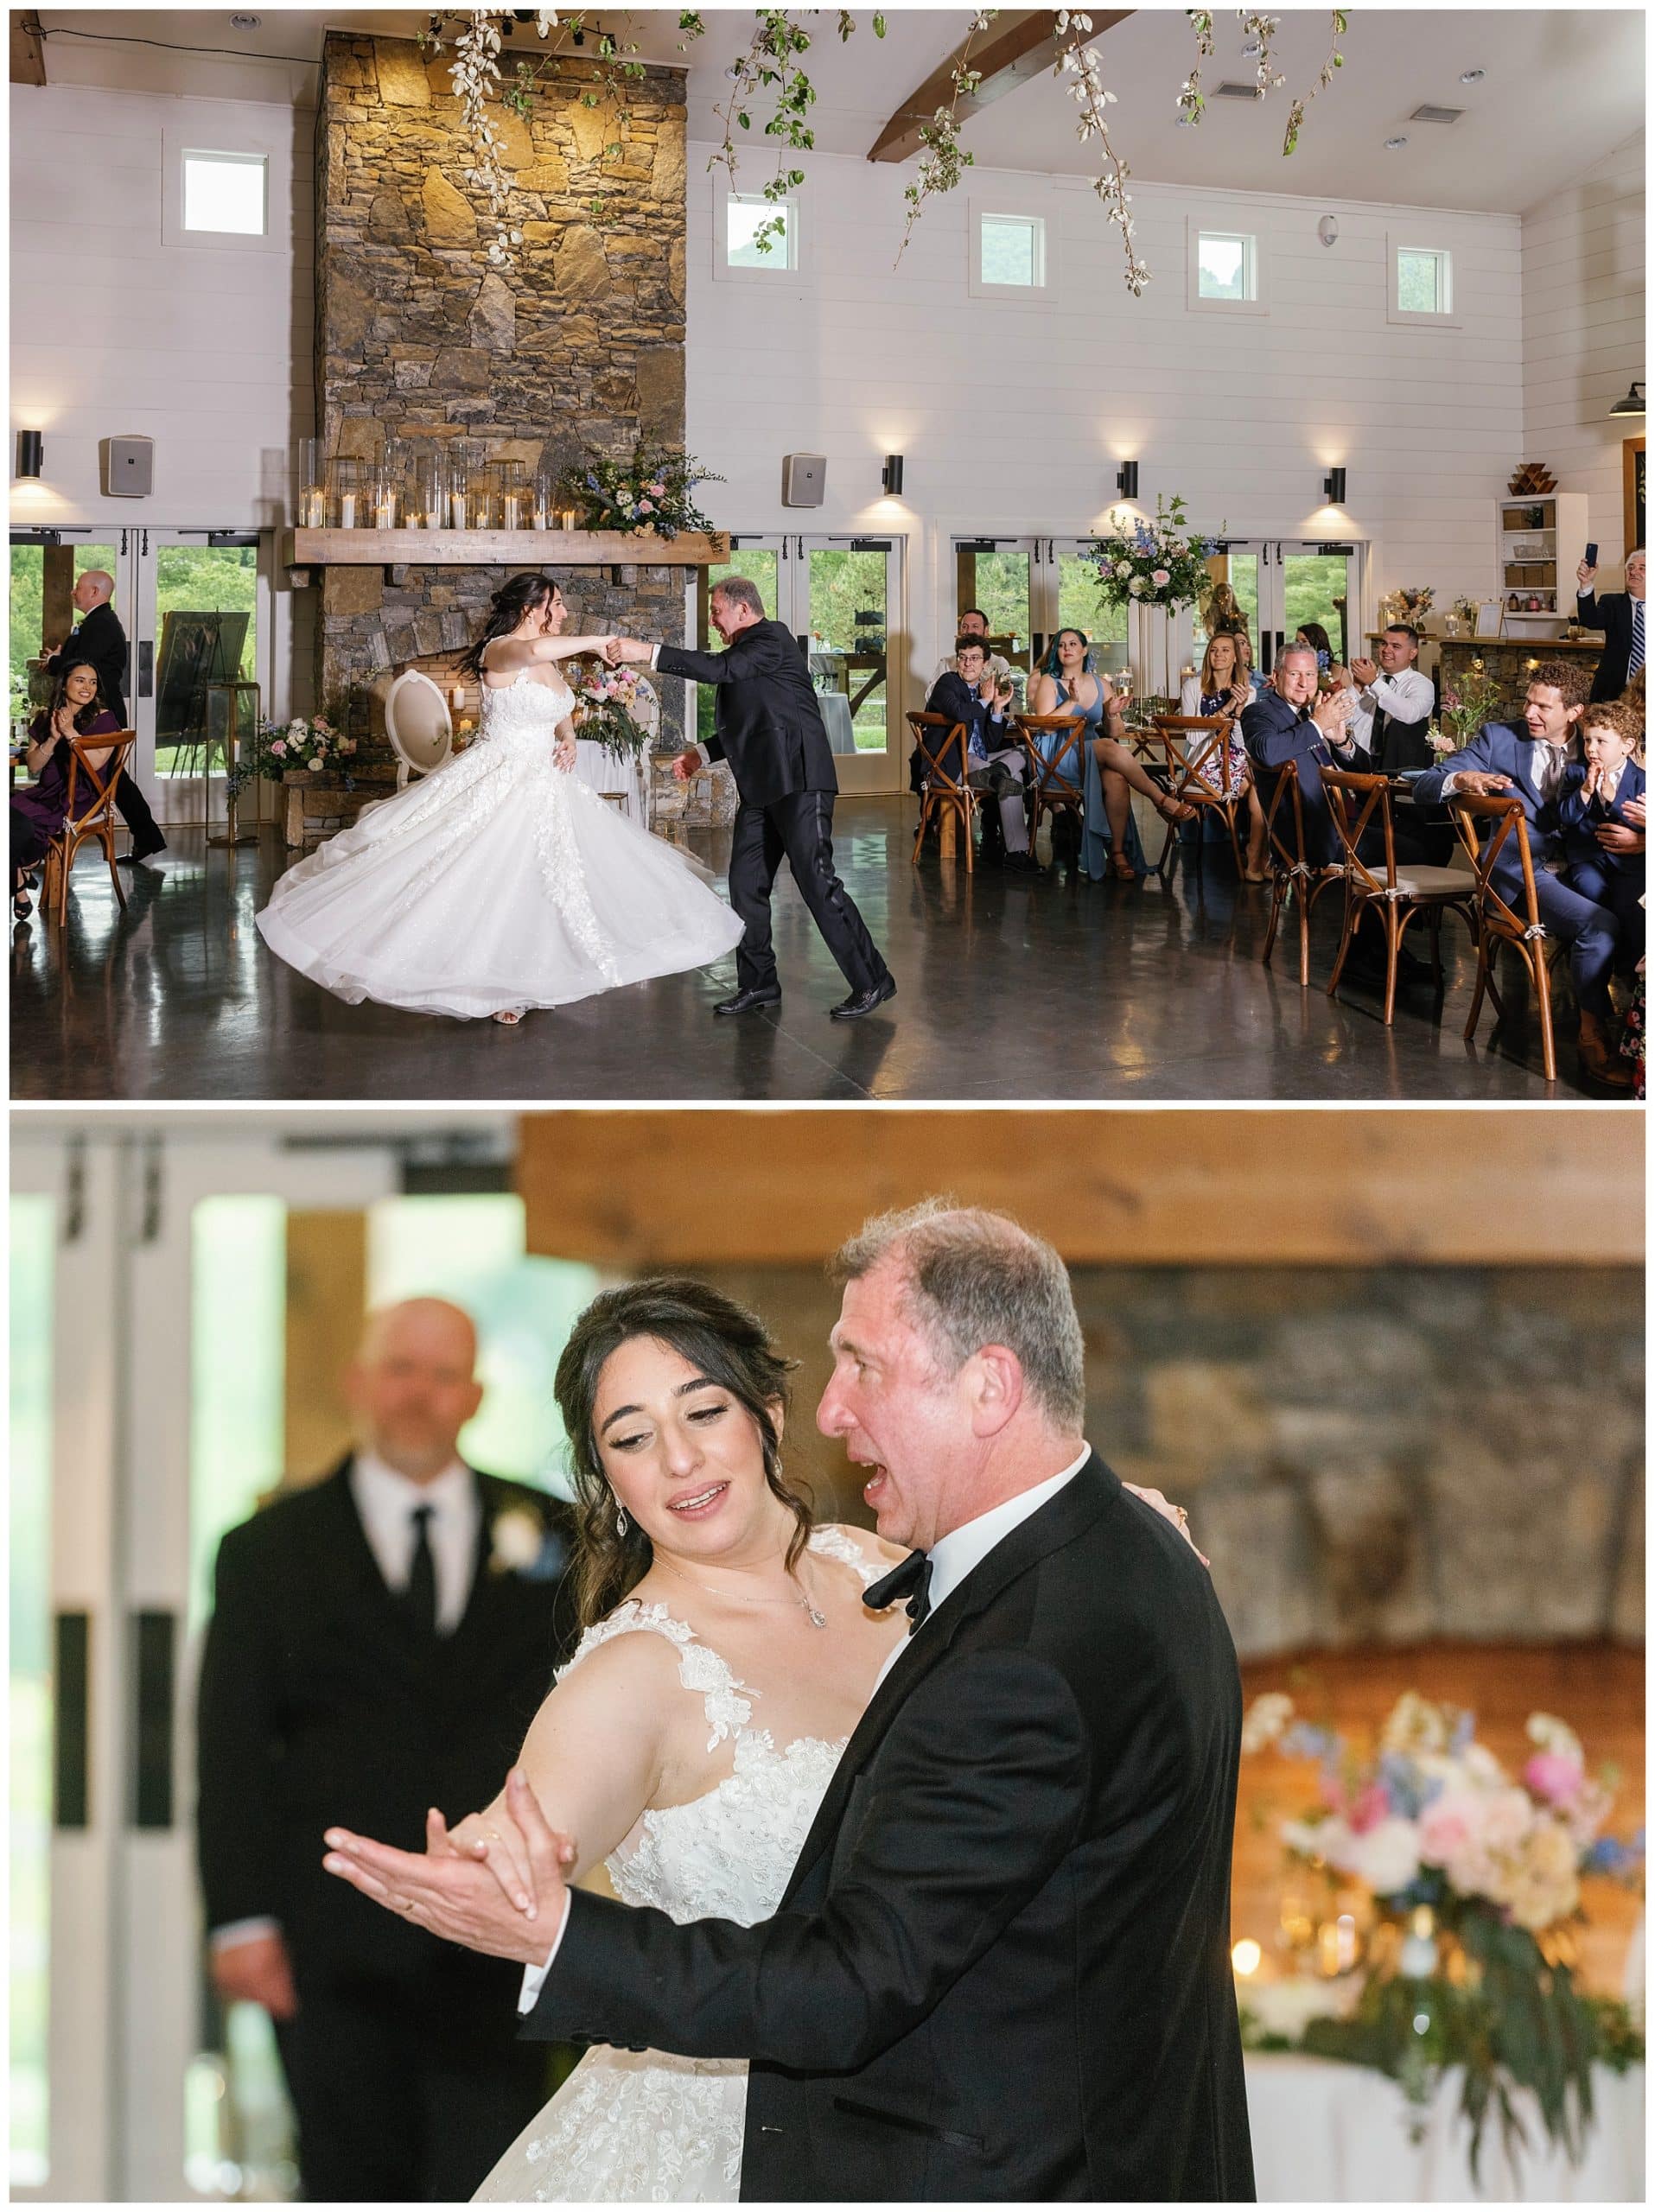 Father and daughter share a dance at wedding reception 